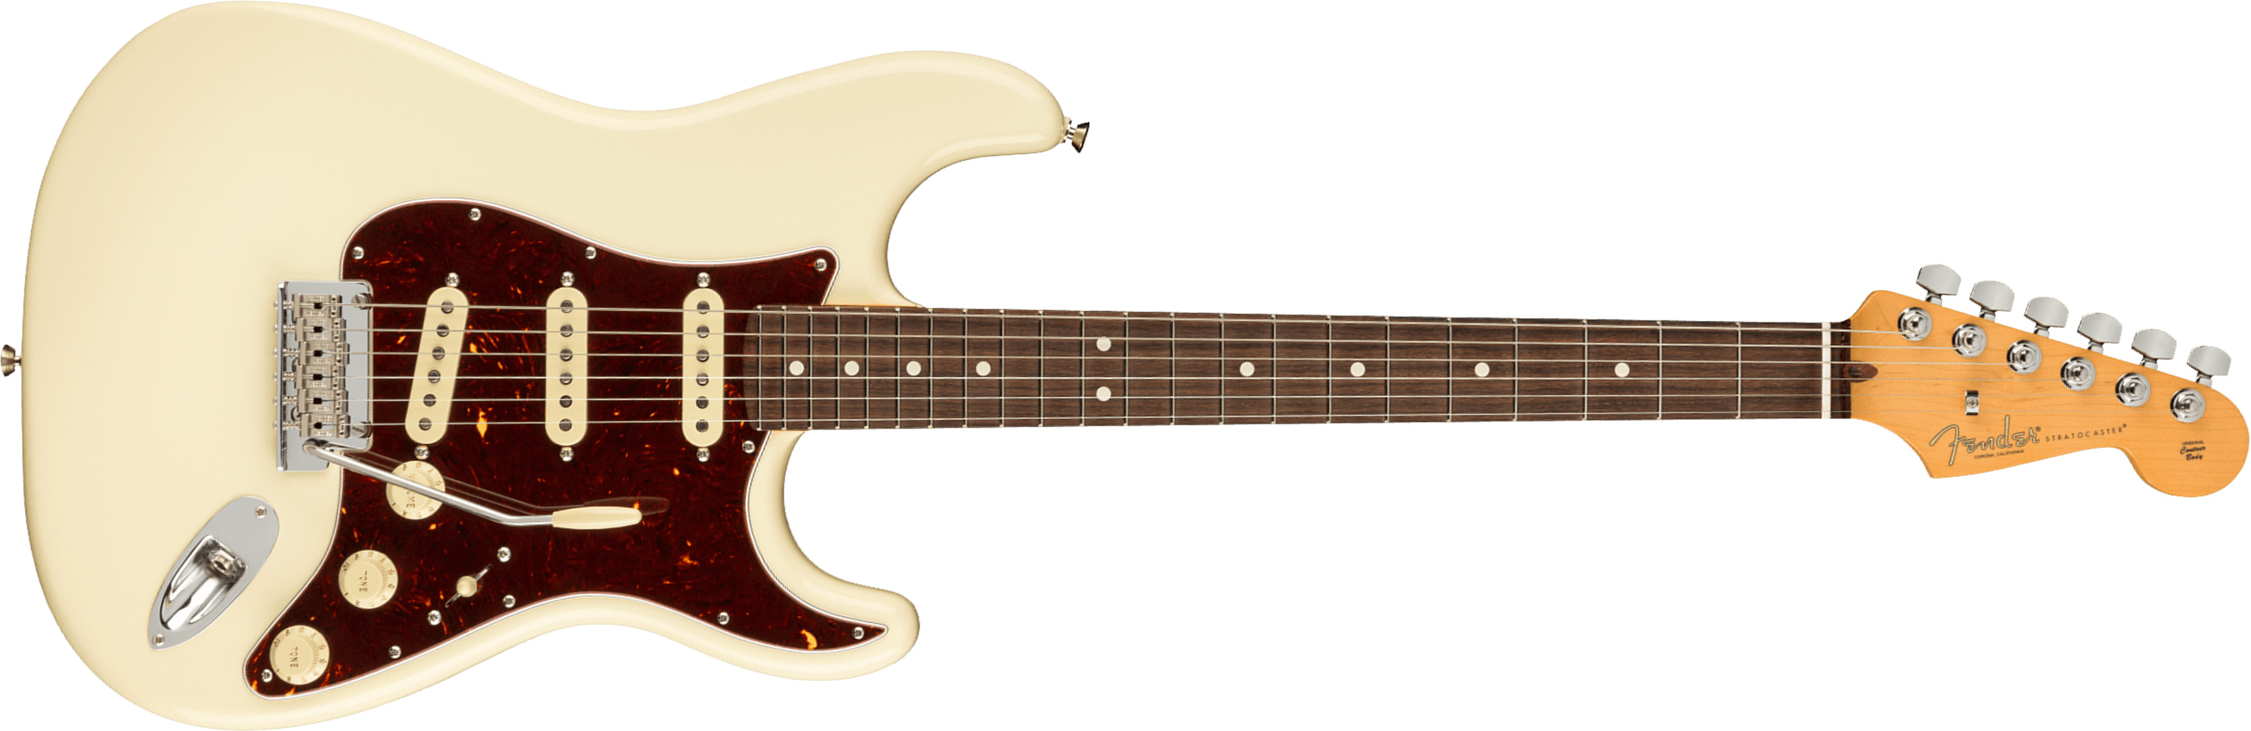 Fender Strat American Professional Ii Usa Rw - Olympic White - Str shape electric guitar - Main picture